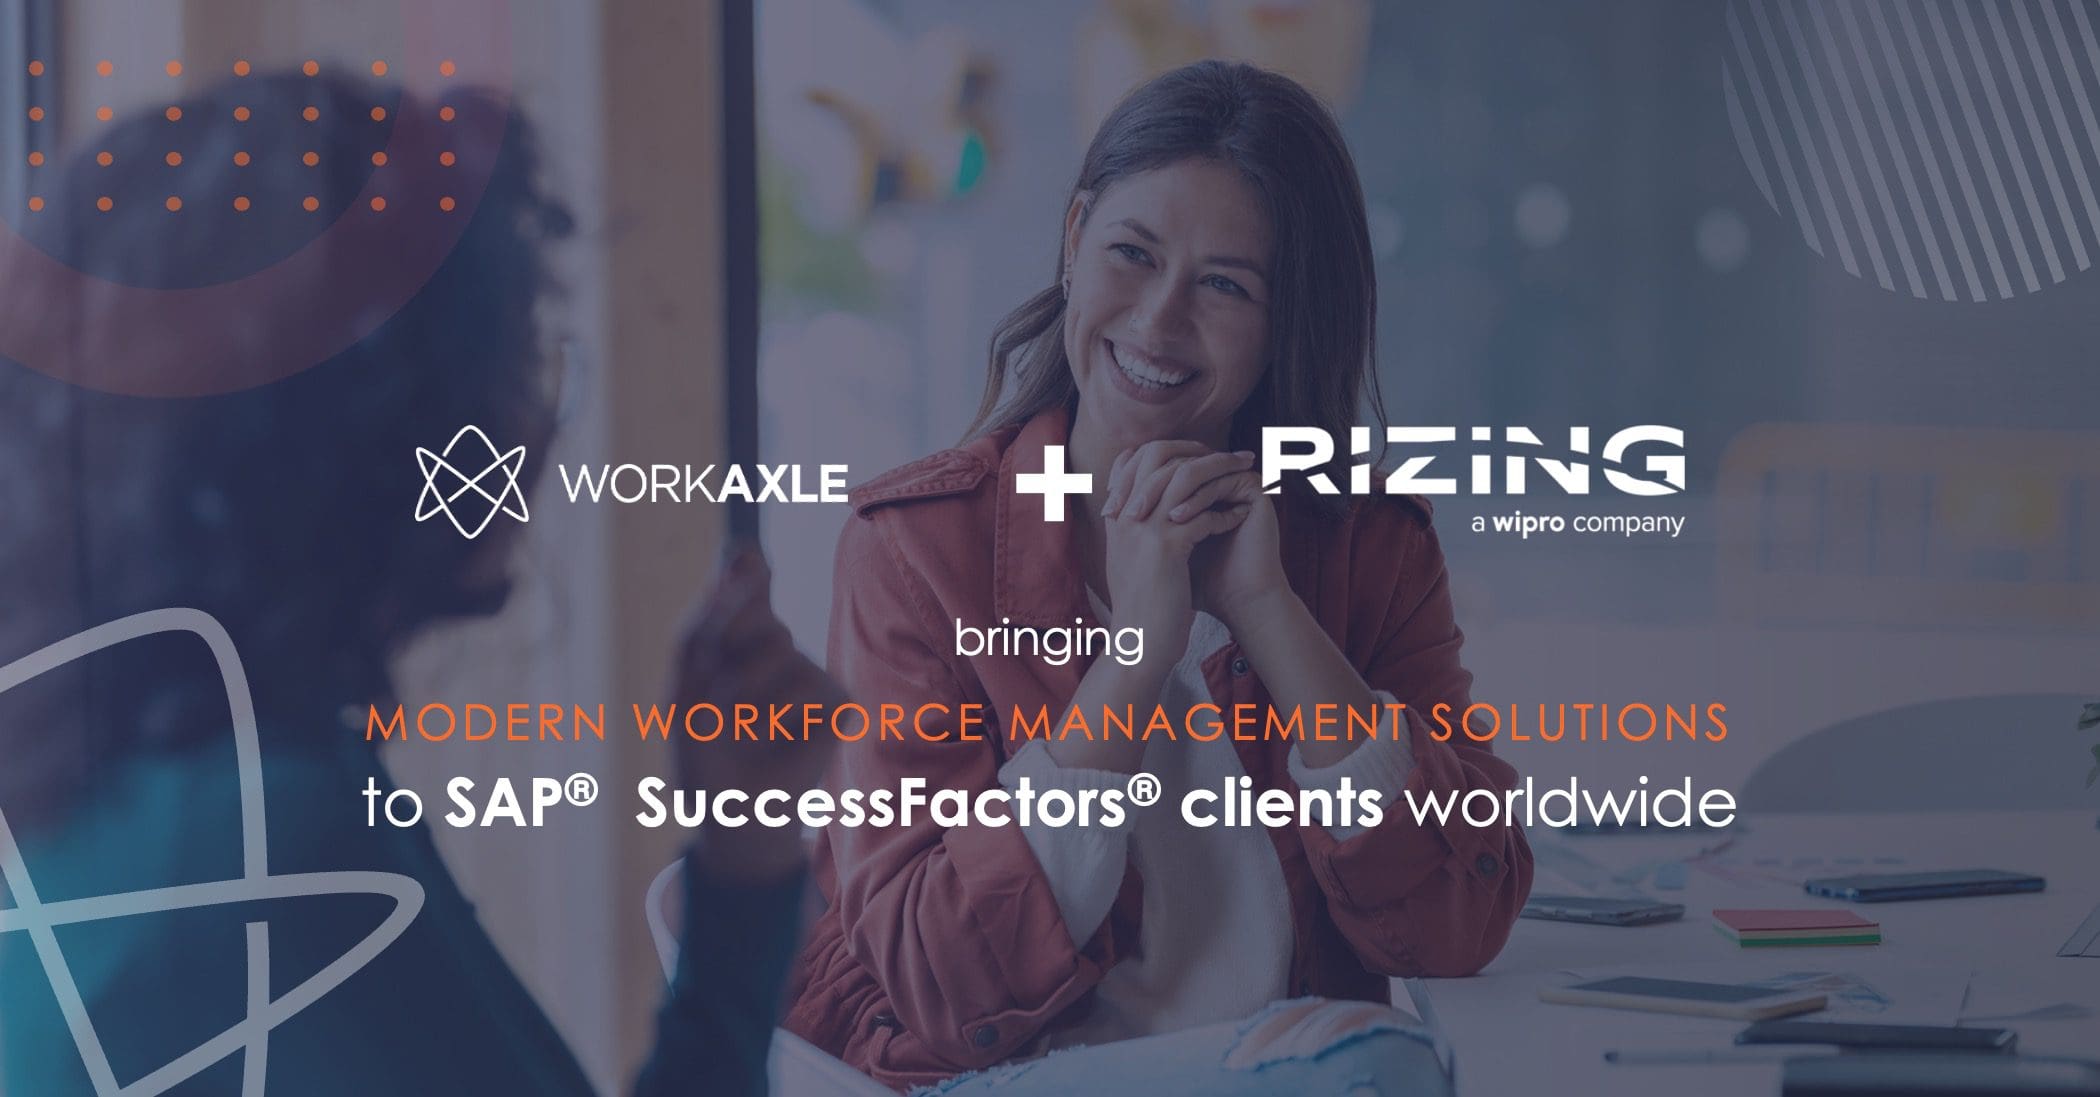 Workforce Management - Partnership between Workaxle and Rizing